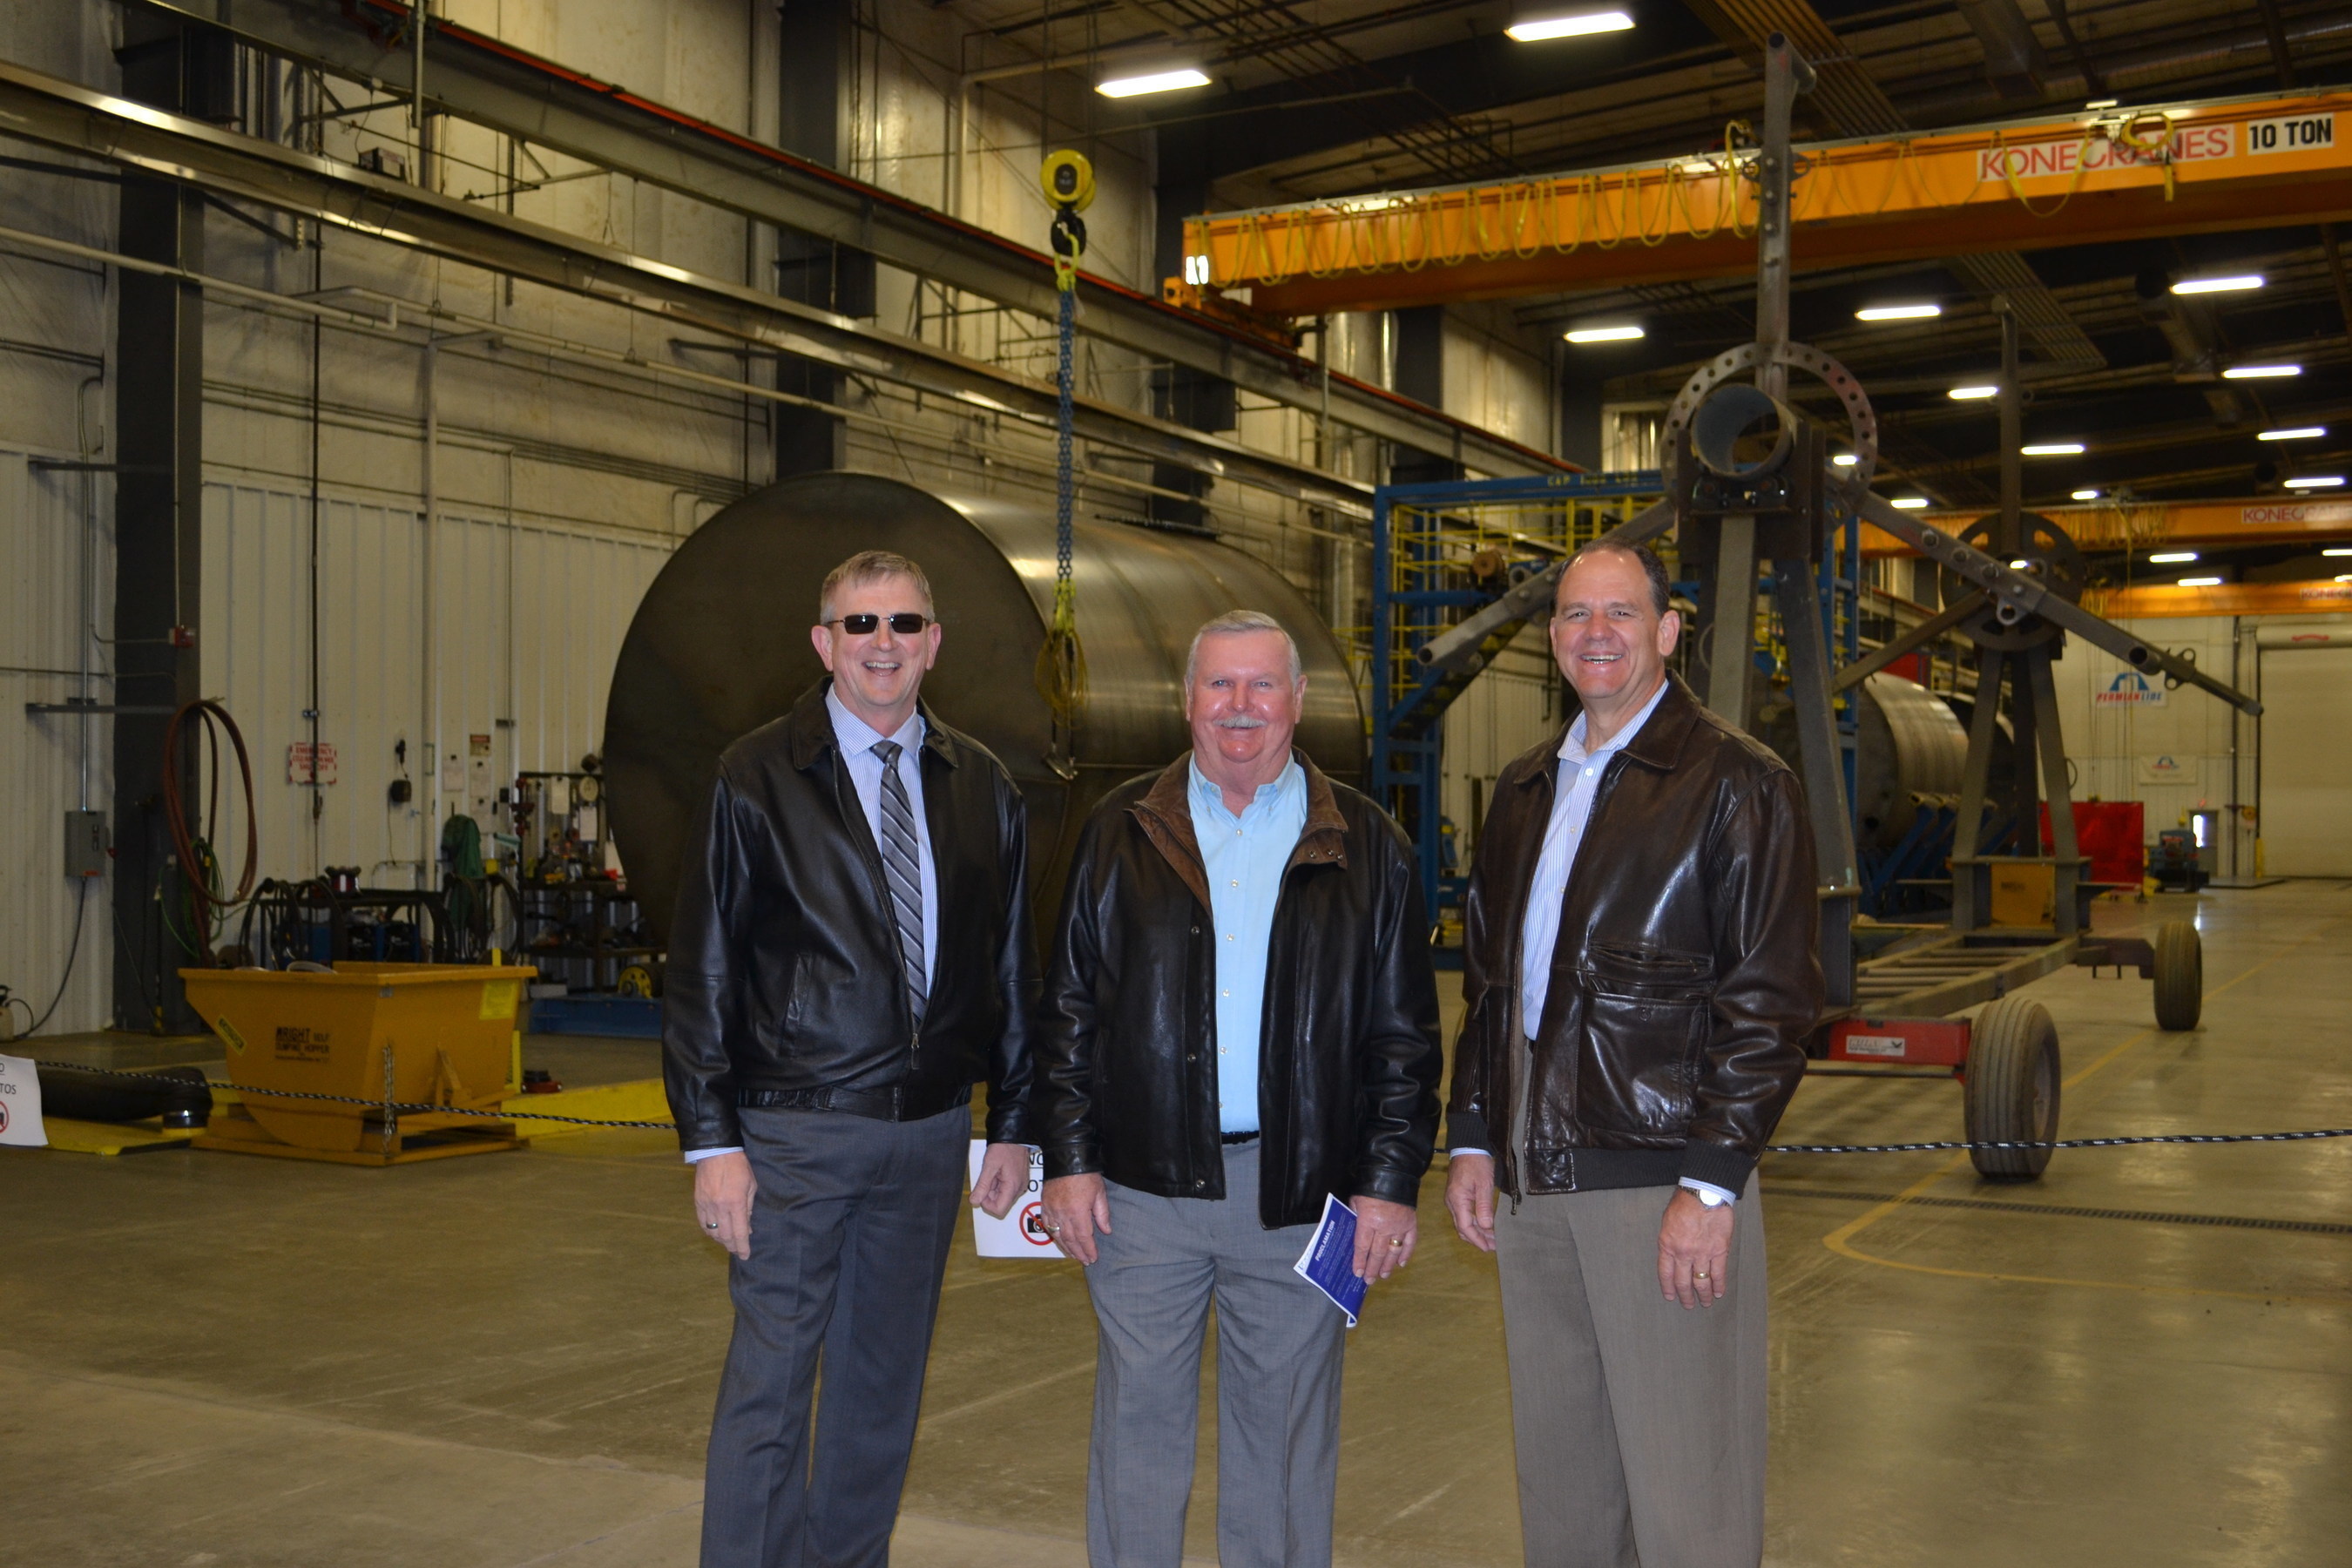 CEO Howard Seely, L. Meider, and D. Edling at Belle Fourche Industrial Rail Park Opening October 6, 2016